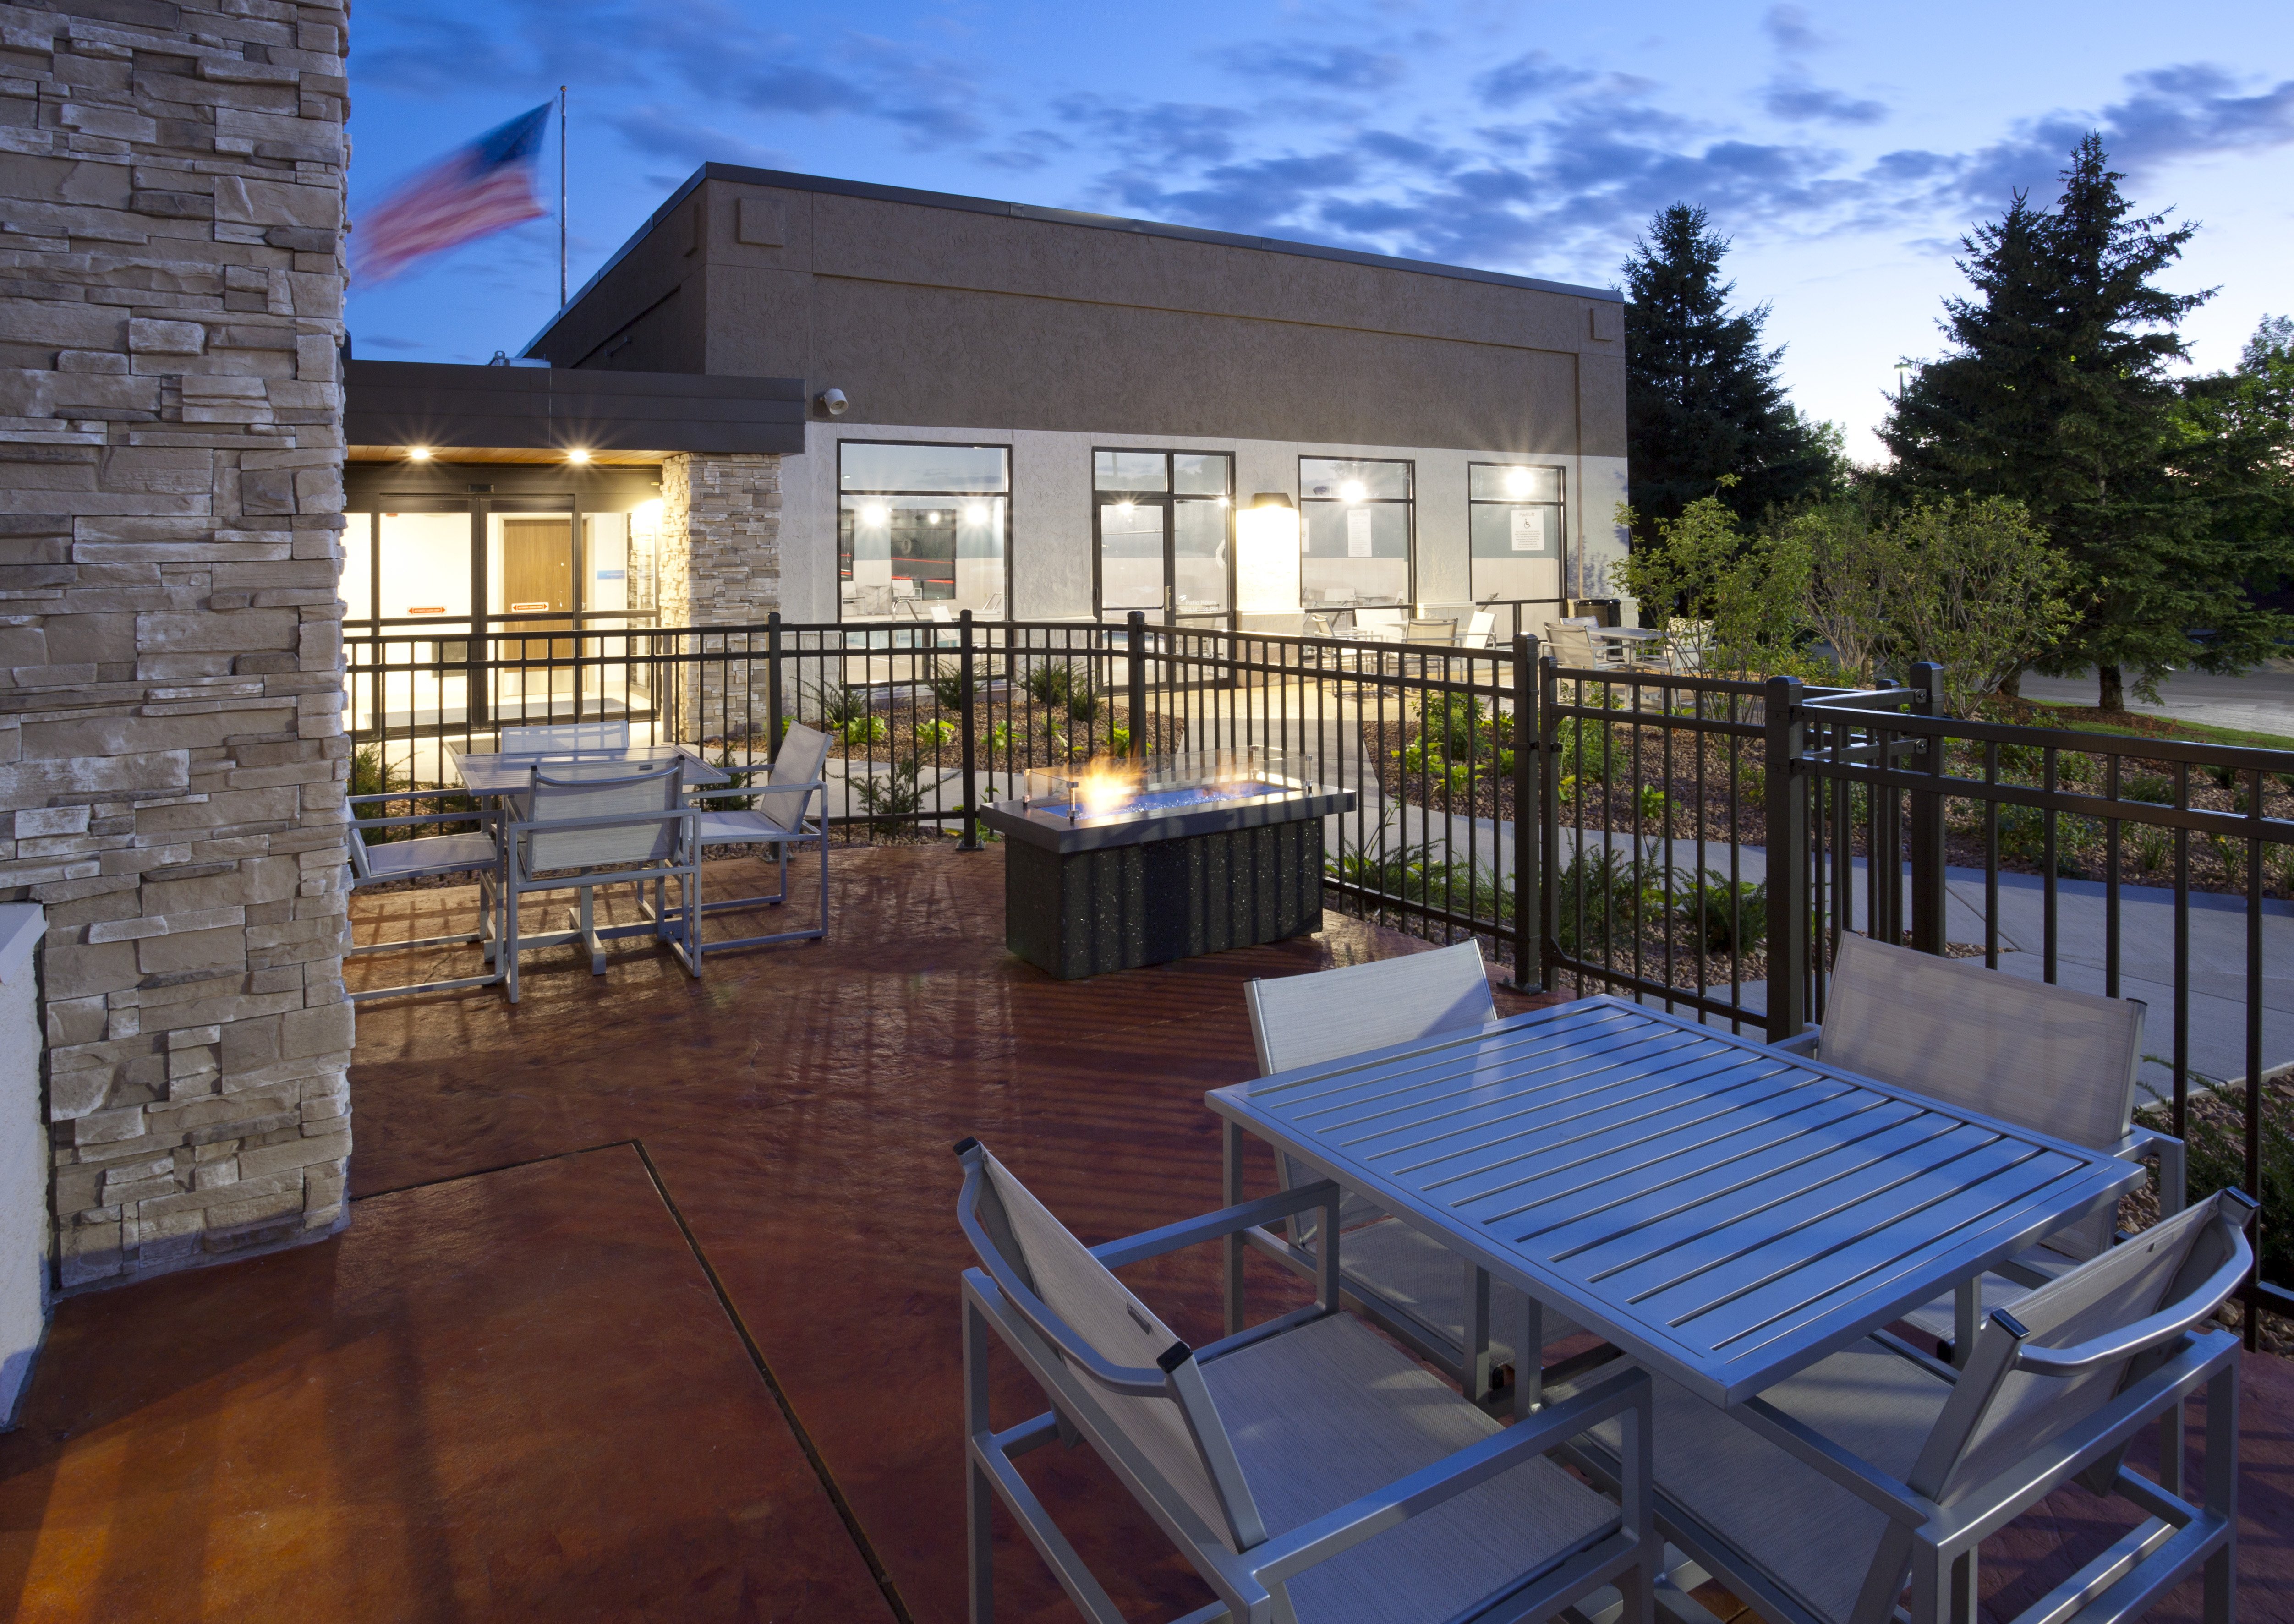 Minneapolis Hotel outdoor patio & firepit to socialize.